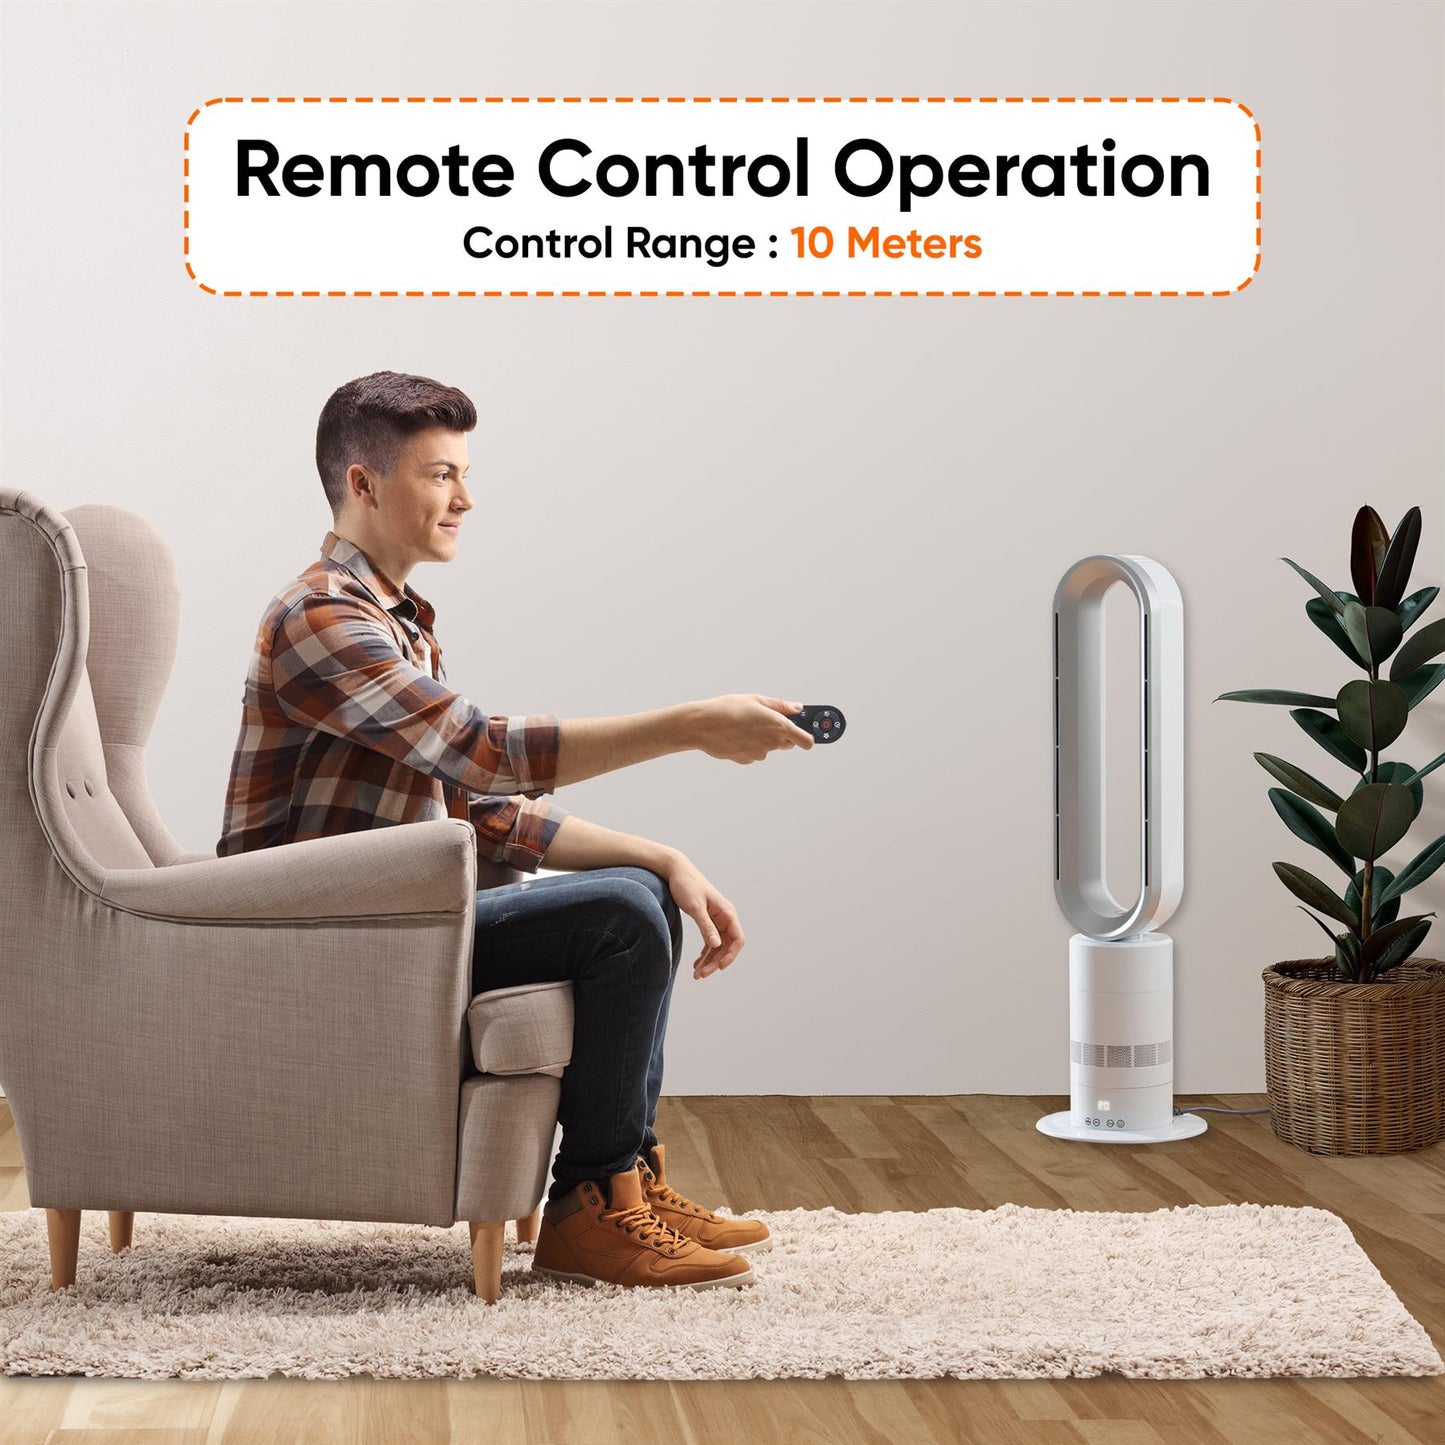 Home Air Cooling Tower Bladeless Fan with Remote Control Home Office Bedroom Use